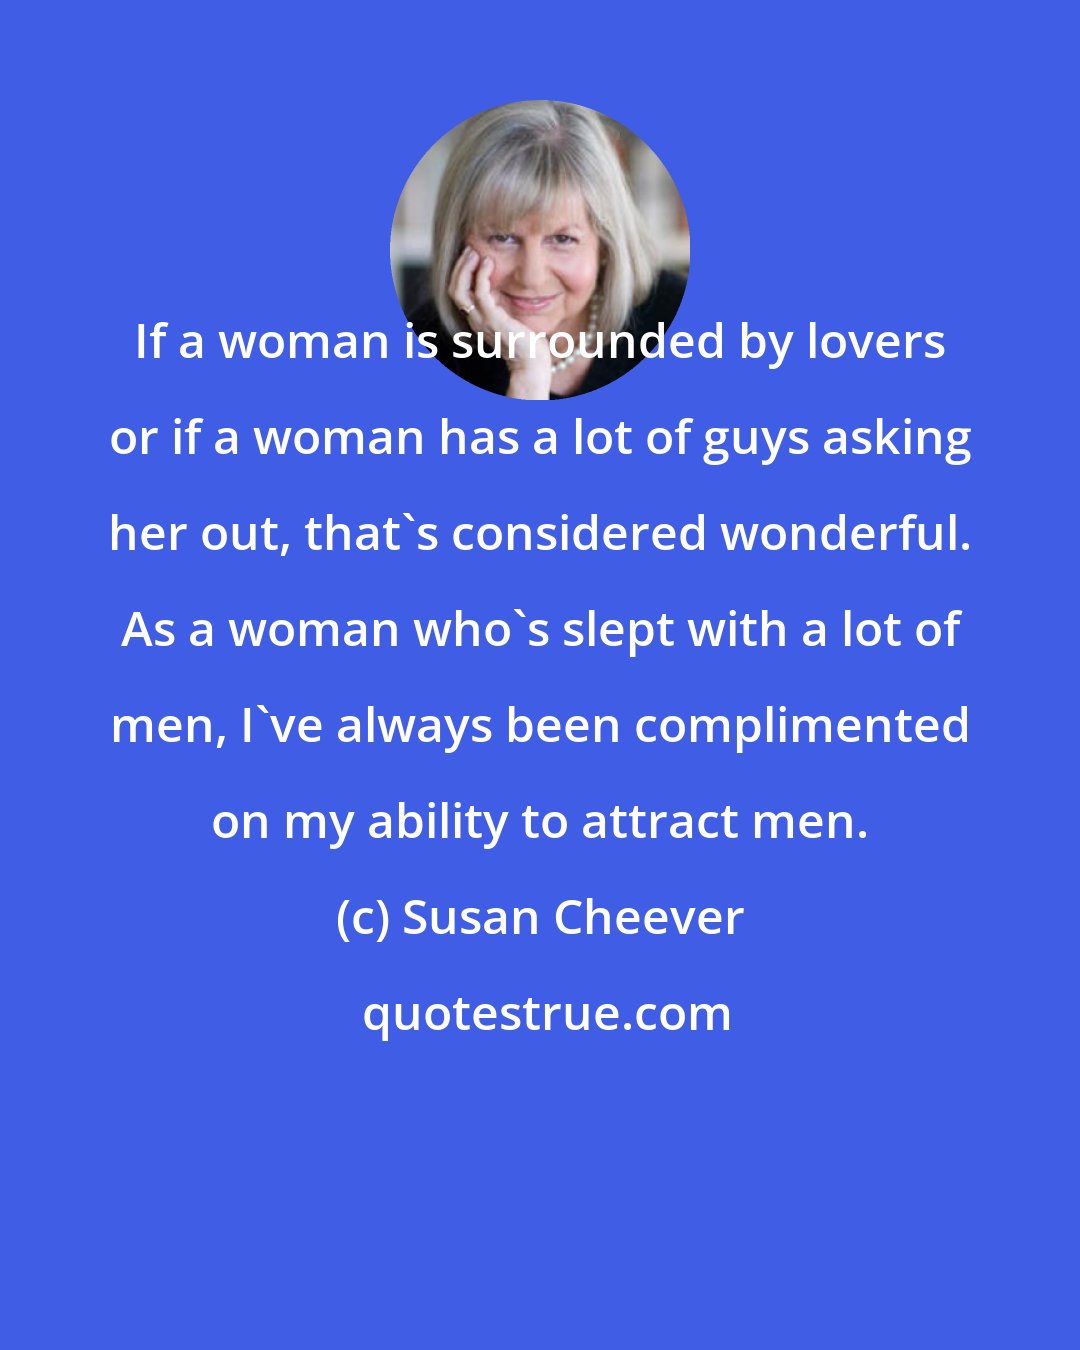 Susan Cheever: If a woman is surrounded by lovers or if a woman has a lot of guys asking her out, that's considered wonderful. As a woman who's slept with a lot of men, I've always been complimented on my ability to attract men.